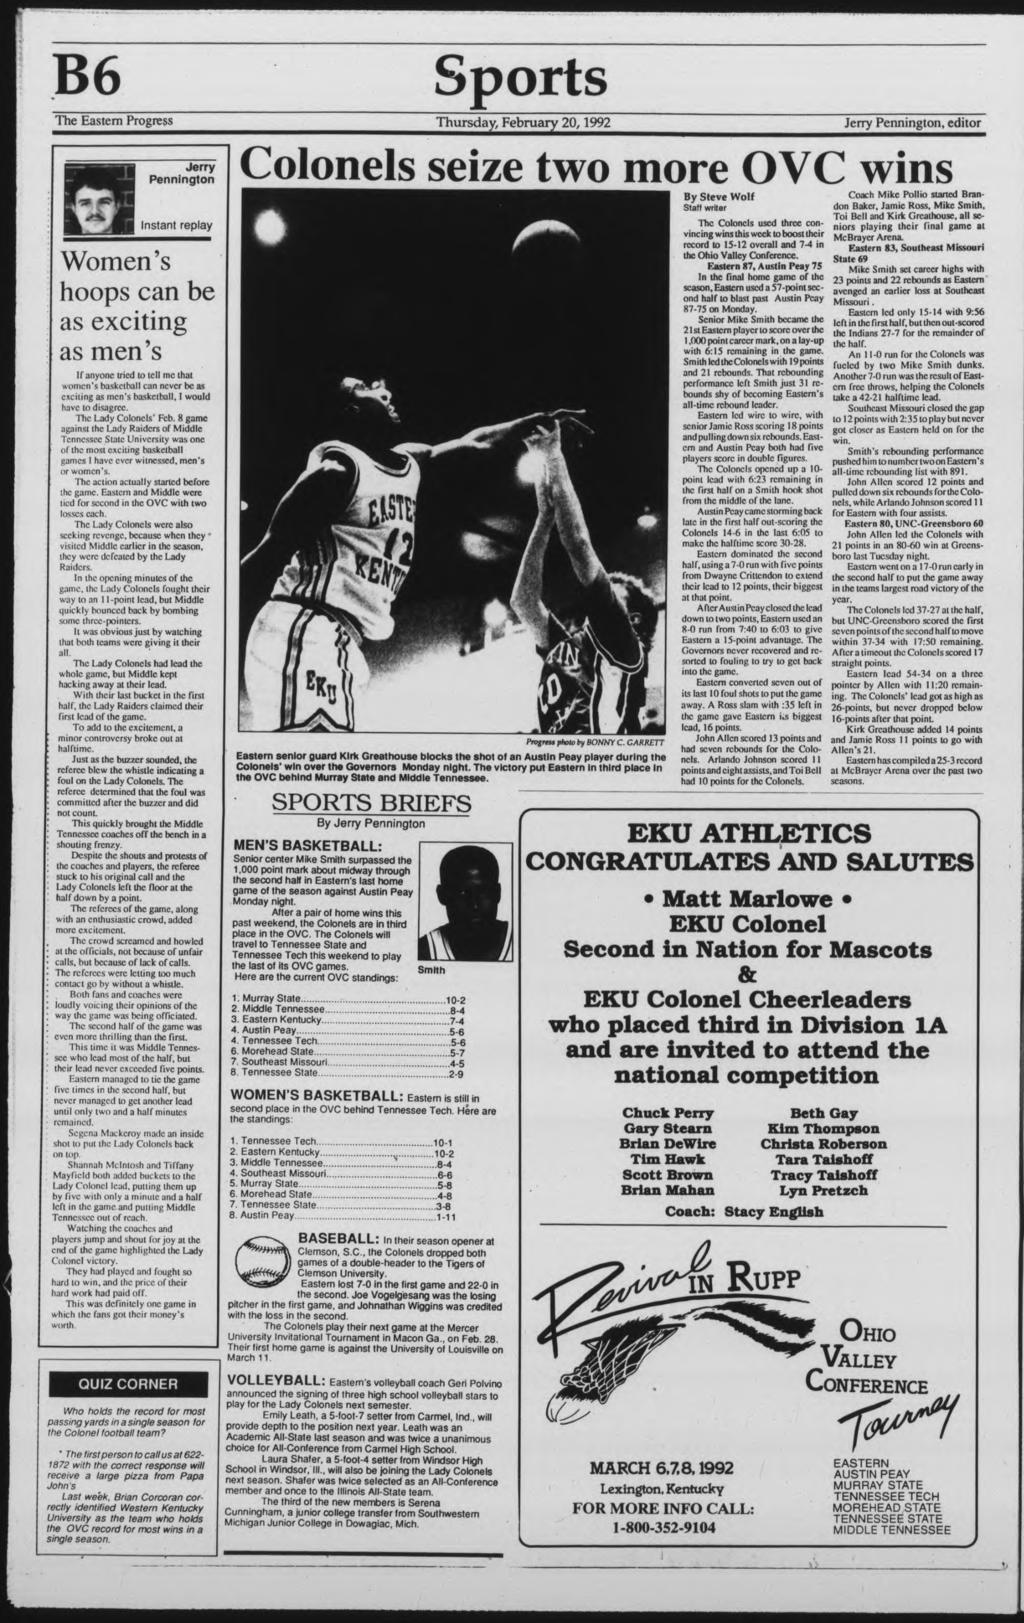 66 The Eastern Progress Sports Thursday, February 20,1992 Jerry Pennngton, edtor Jerry Pennngton nstant replay Women's hoops can be as exctng as men's l anyone tral to tell me that women's basketball